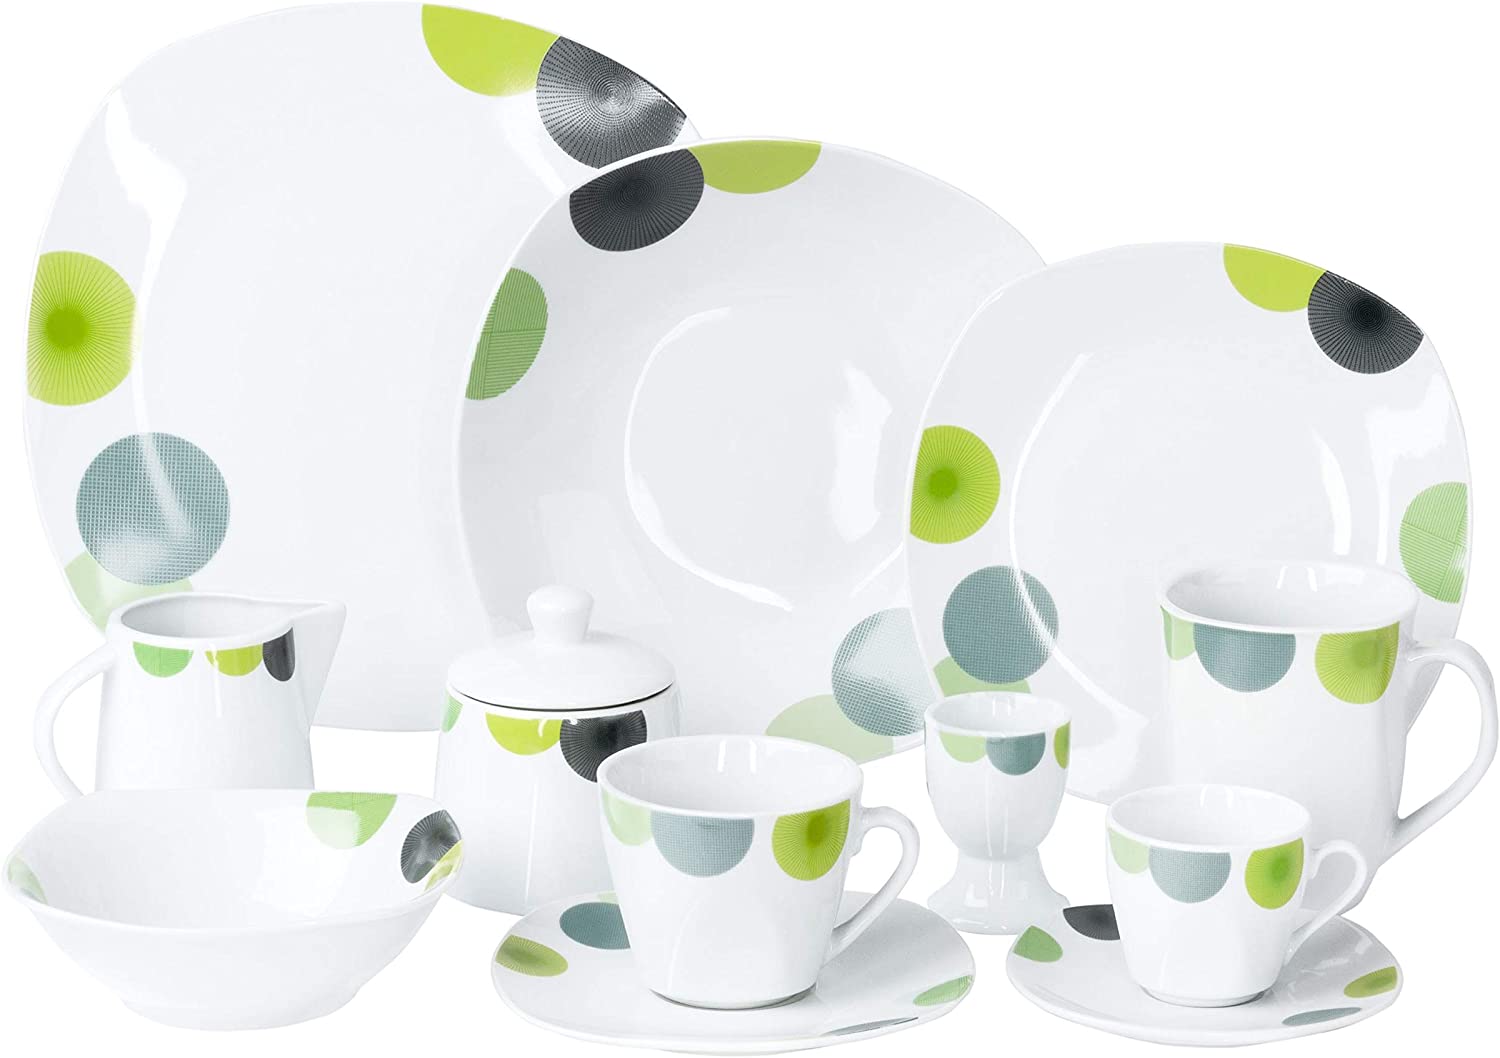 Van Well Rondo 62-Piece Combination Crockery Set for 6 People, Dinner Service + Coffee Set + Accessories, Retro Look Green/Yellow, Fine Porcelain, Circles